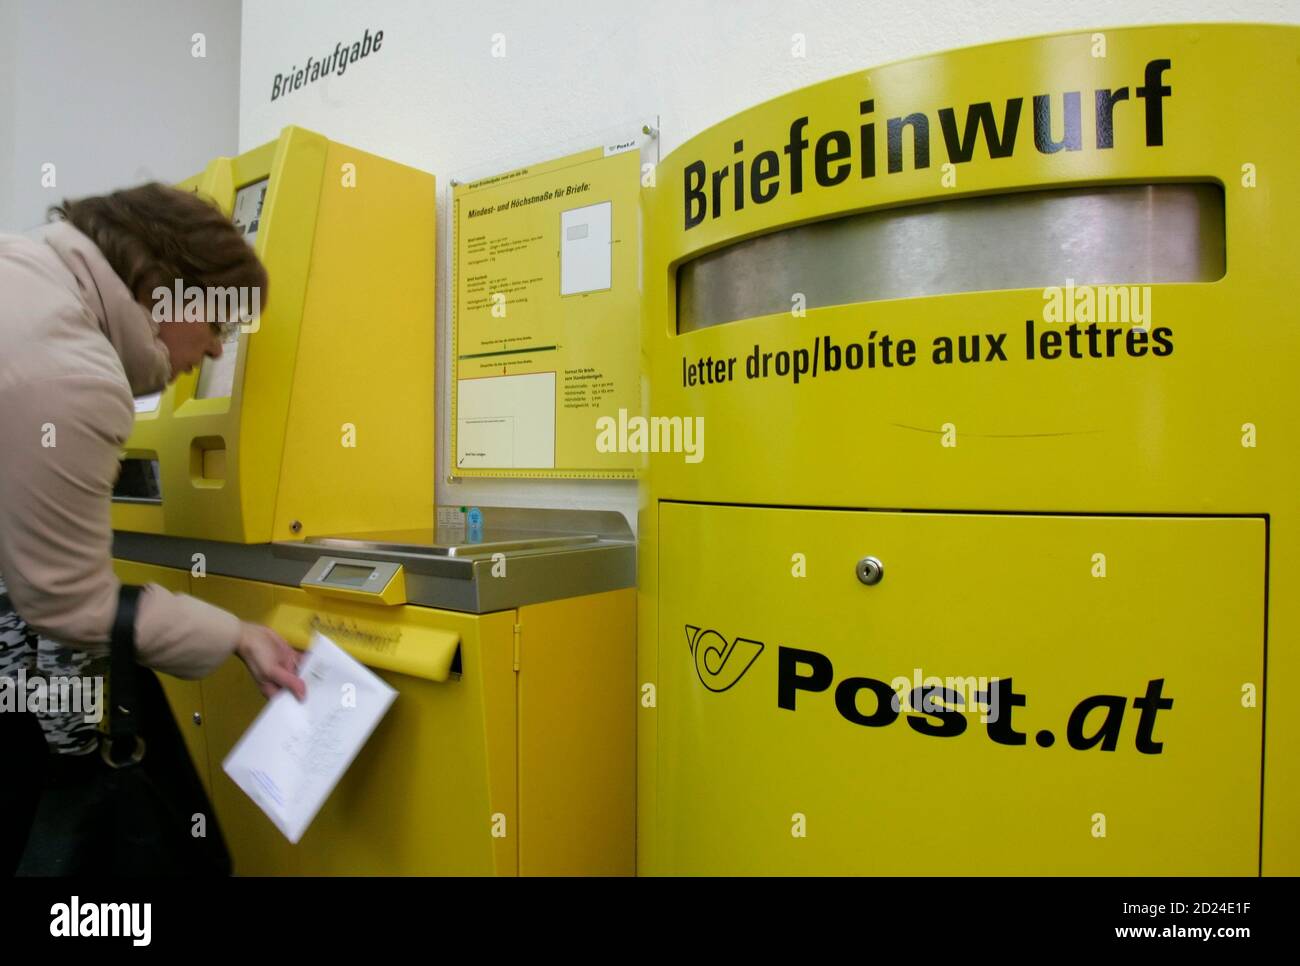 A woman drops a letter in a post office in Vienna November 12, 2008.  Austria's Infrastructure Minister Werner Faymann said on Tuesday he aims to  delay the closure of branches run by